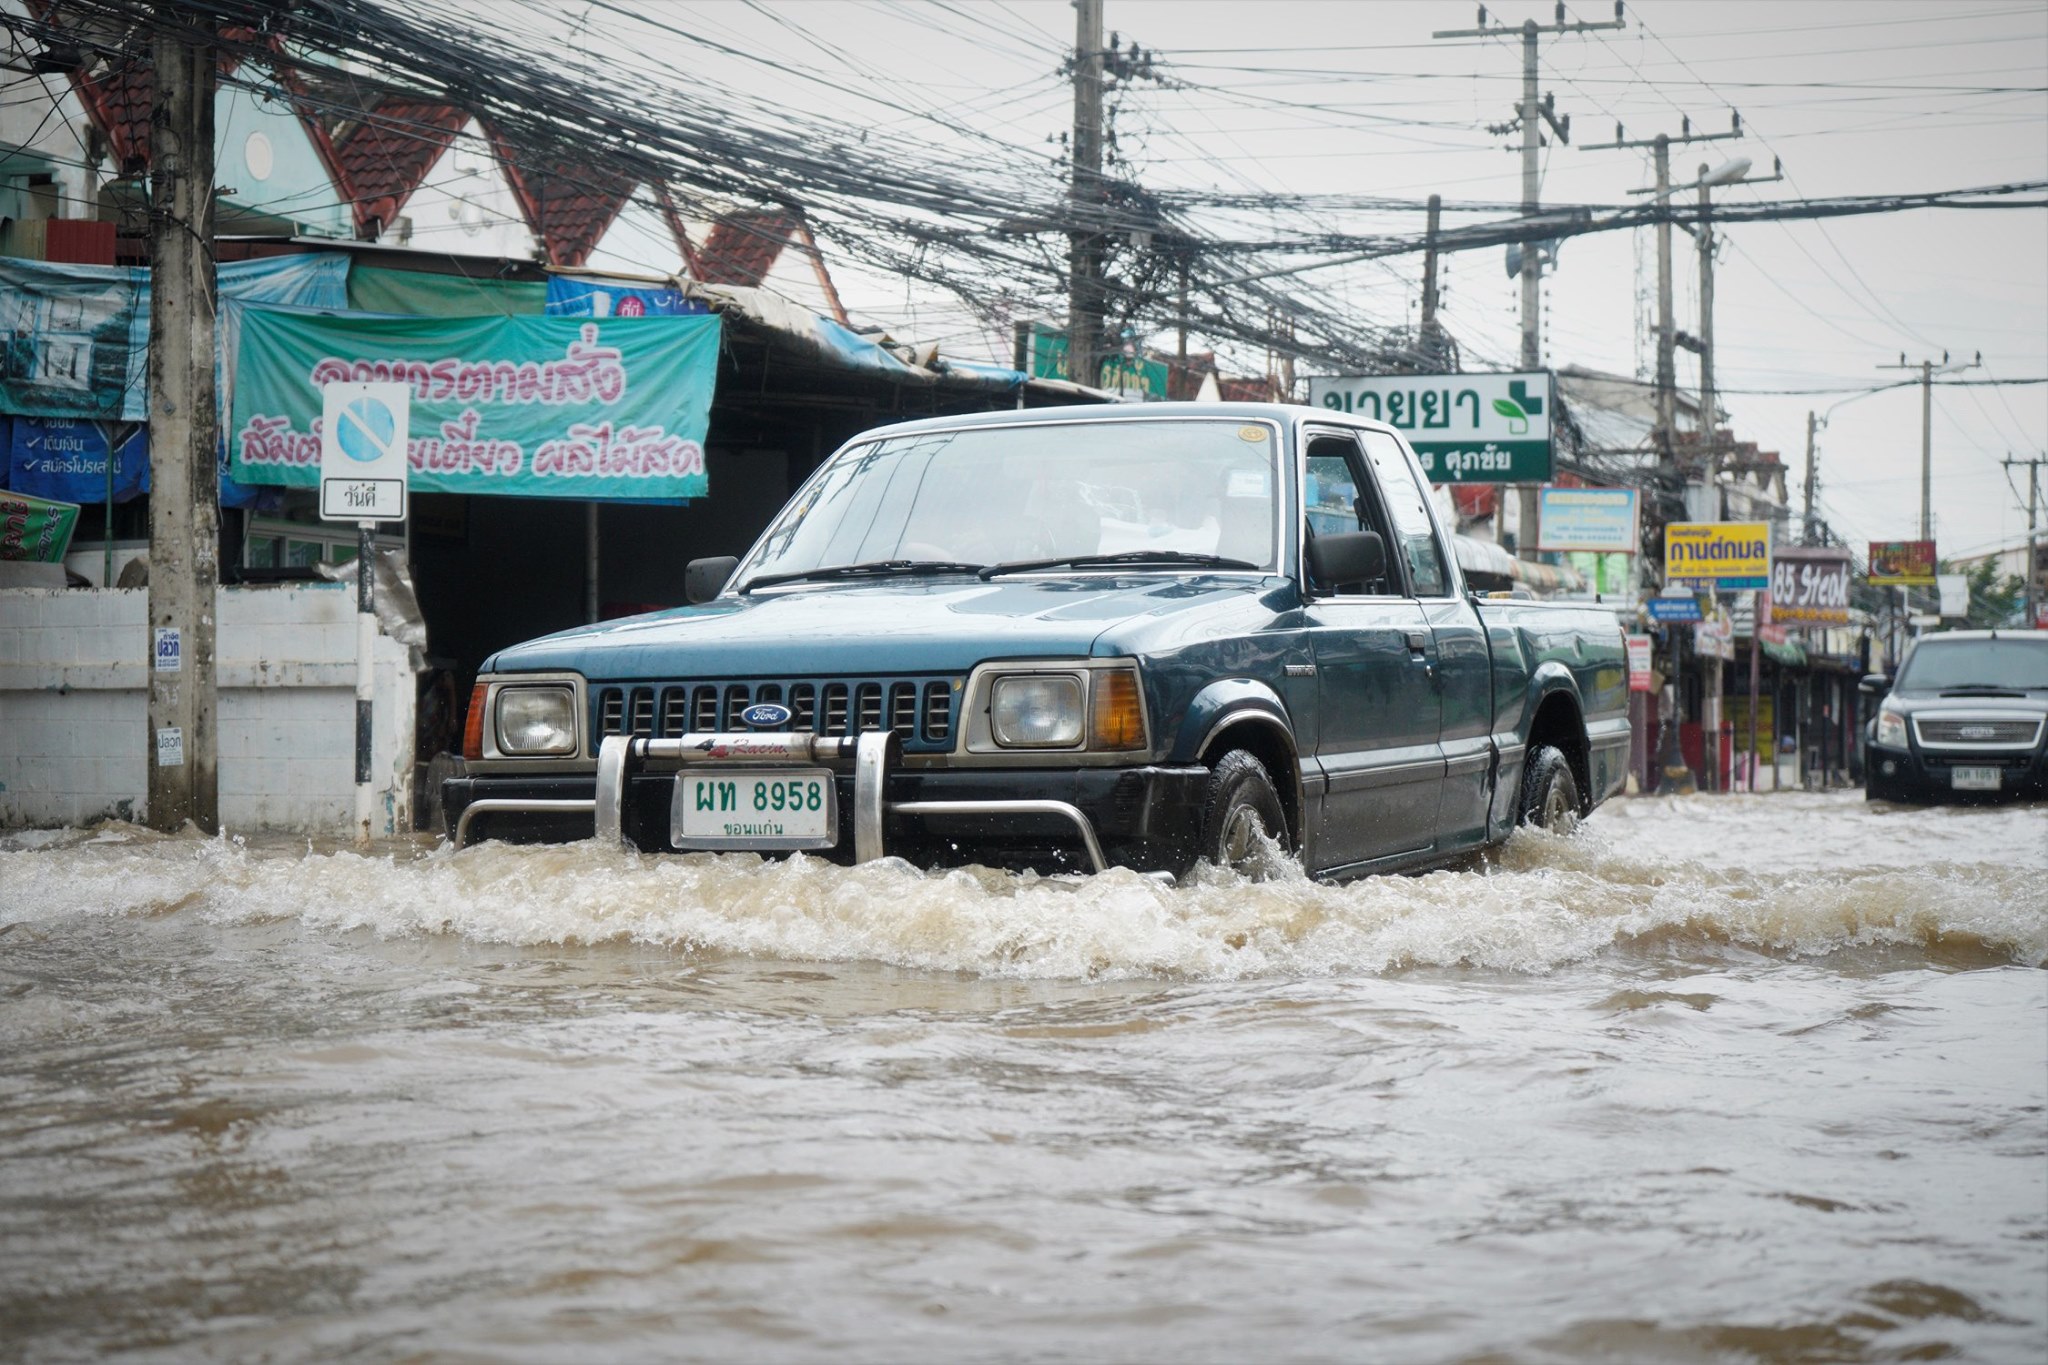 Future flood mitigation in Thailand will require individual accountability